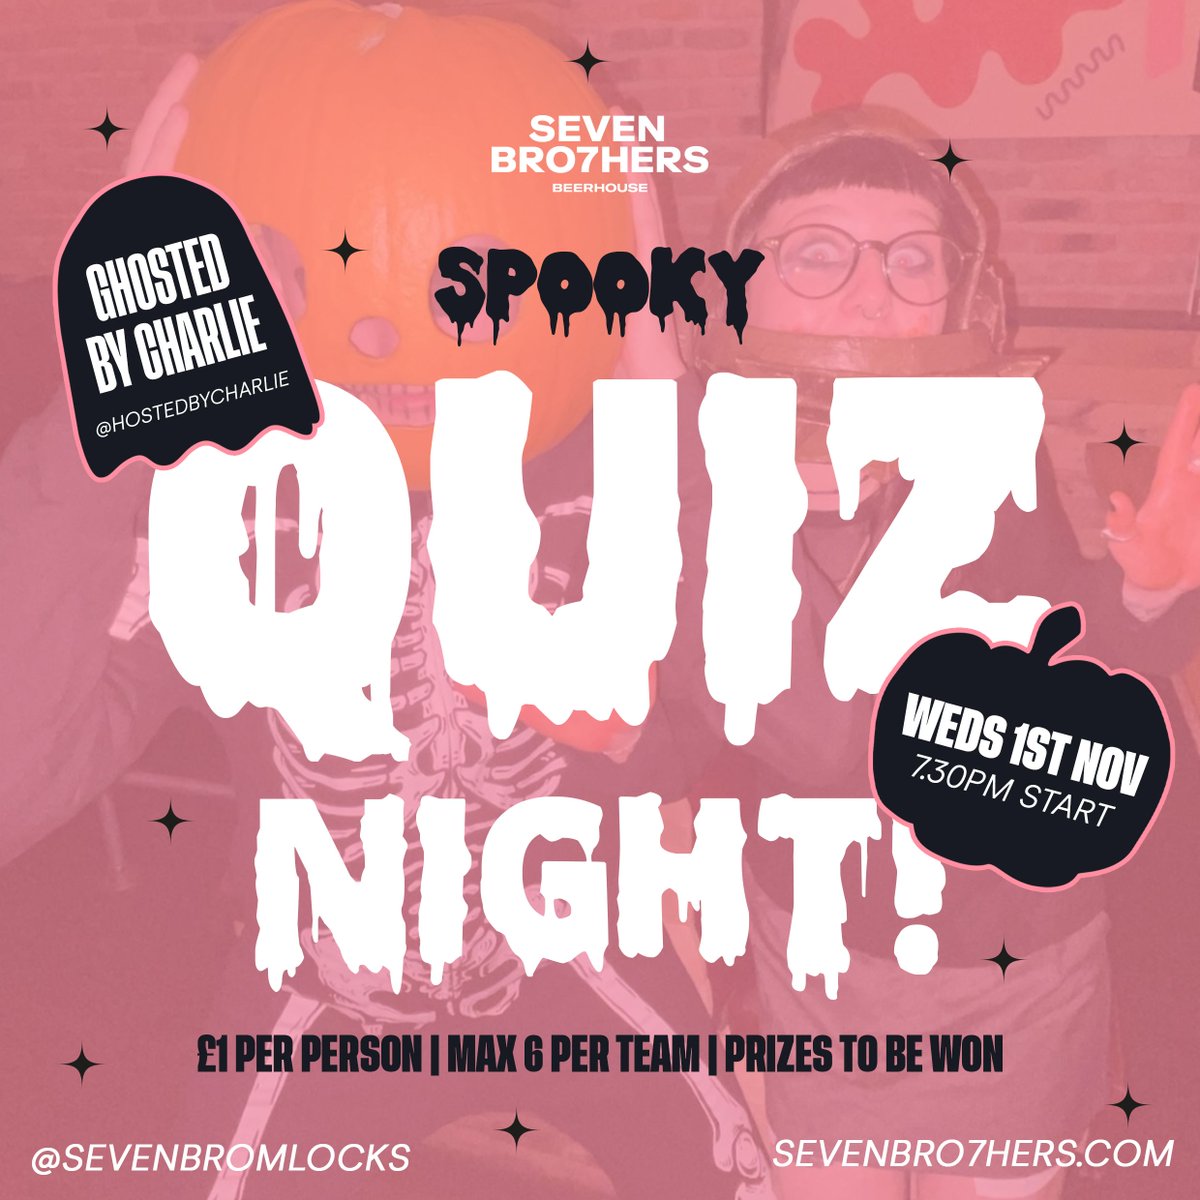 Come and put your spooky knowledge to the test in our Halloween themed Quiz Night this Weds at our Middlewood Locks Beerhouse...👻🔪💀 JUST £1 entry pp | Max 6 monsters per team | Plenty of petrifying prizes to be won! Scary costumes highly encouraged. Doggos welcome 🐶